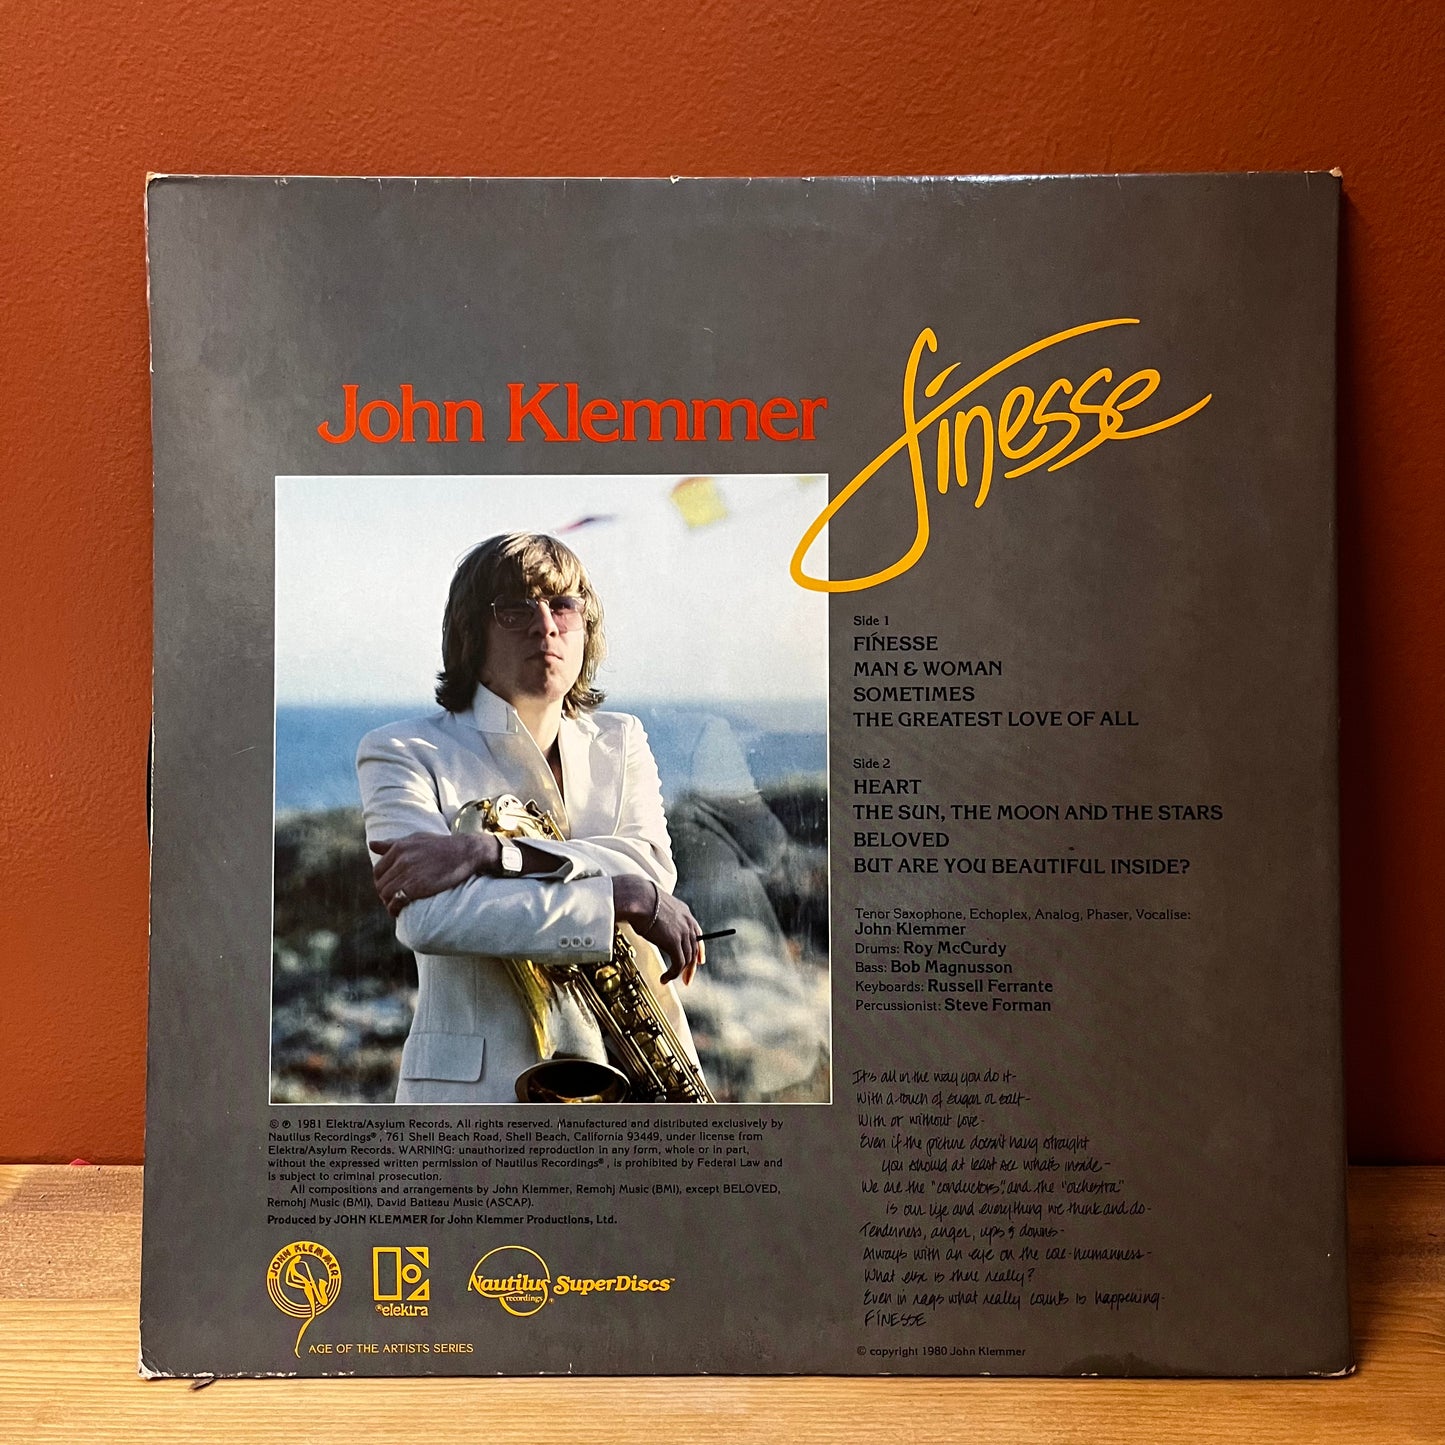 Finesse - John Klemmer Limited Edition Direct-to-disc Recording NR 22 Used VG+/NM Vinyl